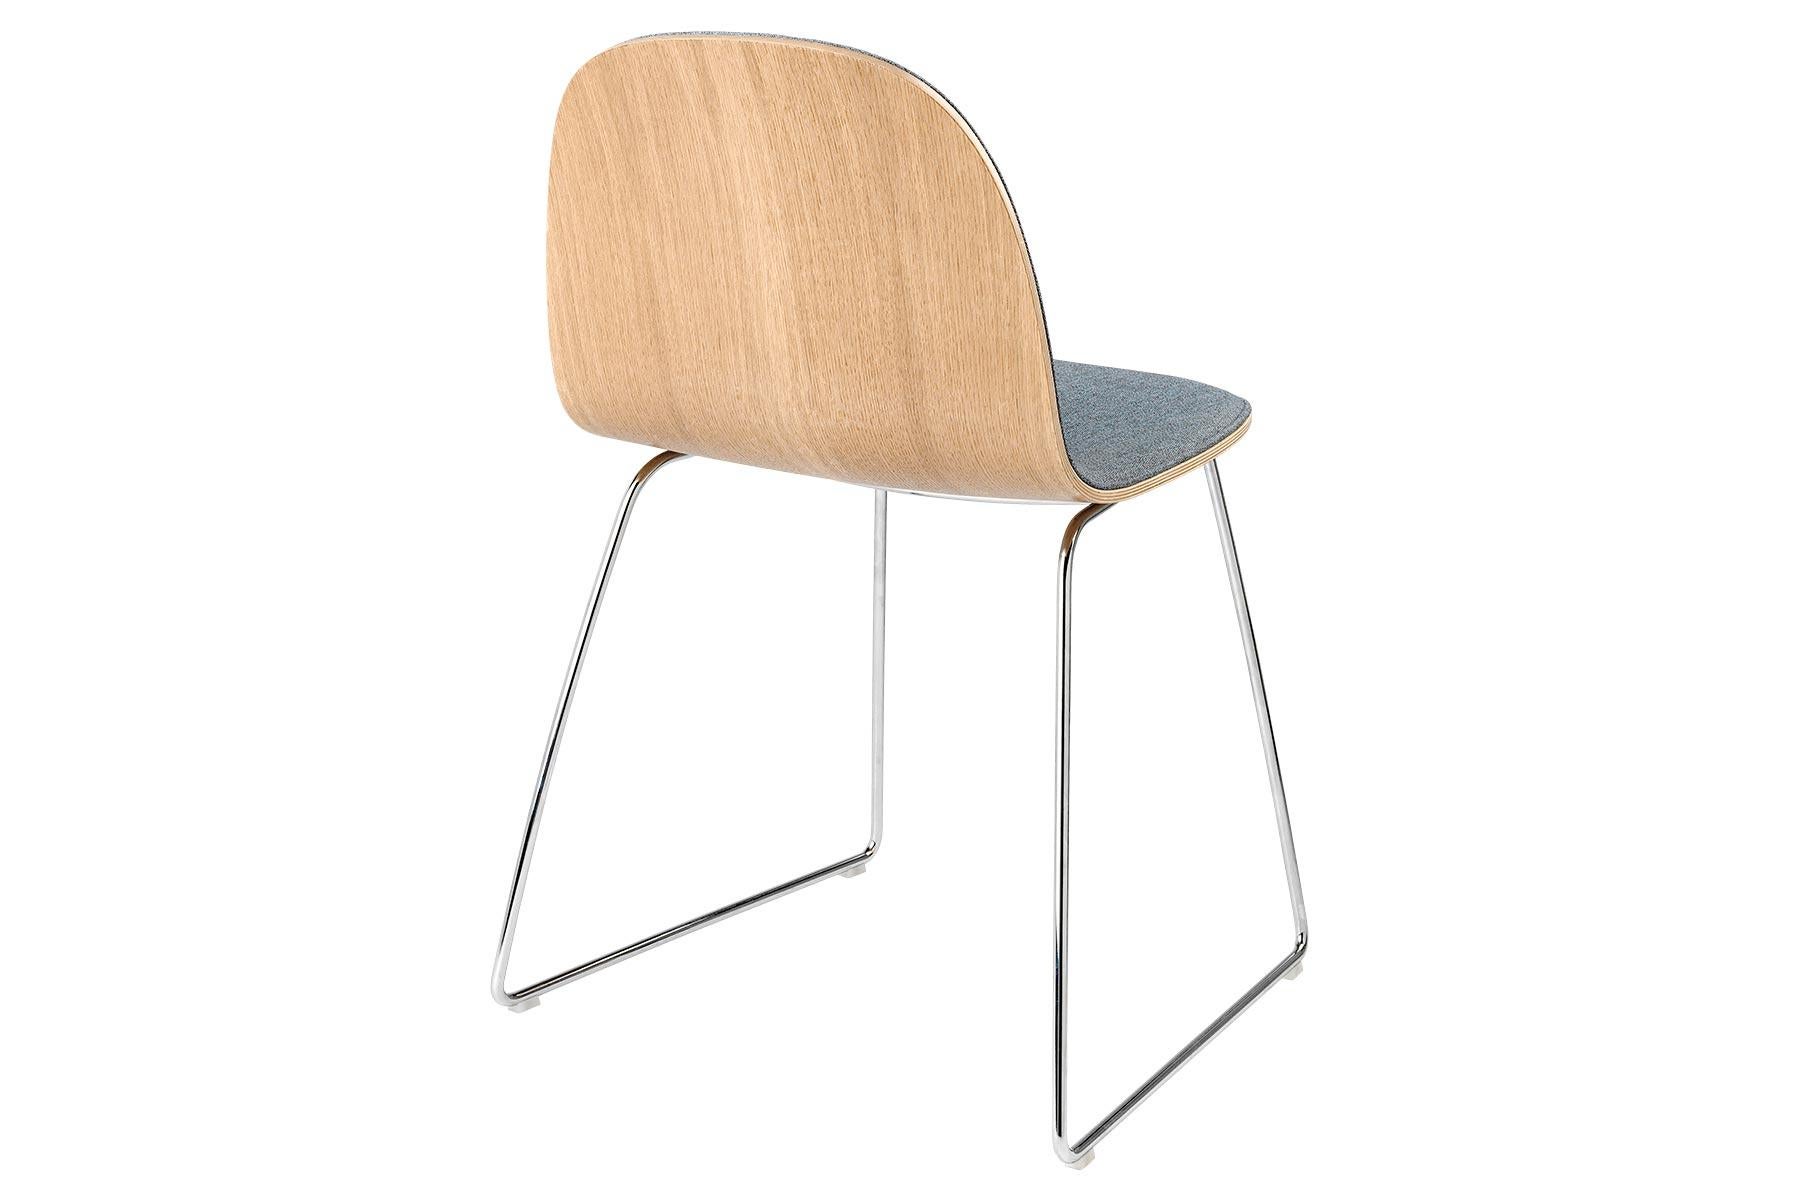 The GUBI 2D Chair is a series of light dining chairs made from laminated veneer with options for front upholstery in a wide range of fabrics and leathers, suitable for both private and public spaces. Being an extension to the classic GUBI 3D Chair,